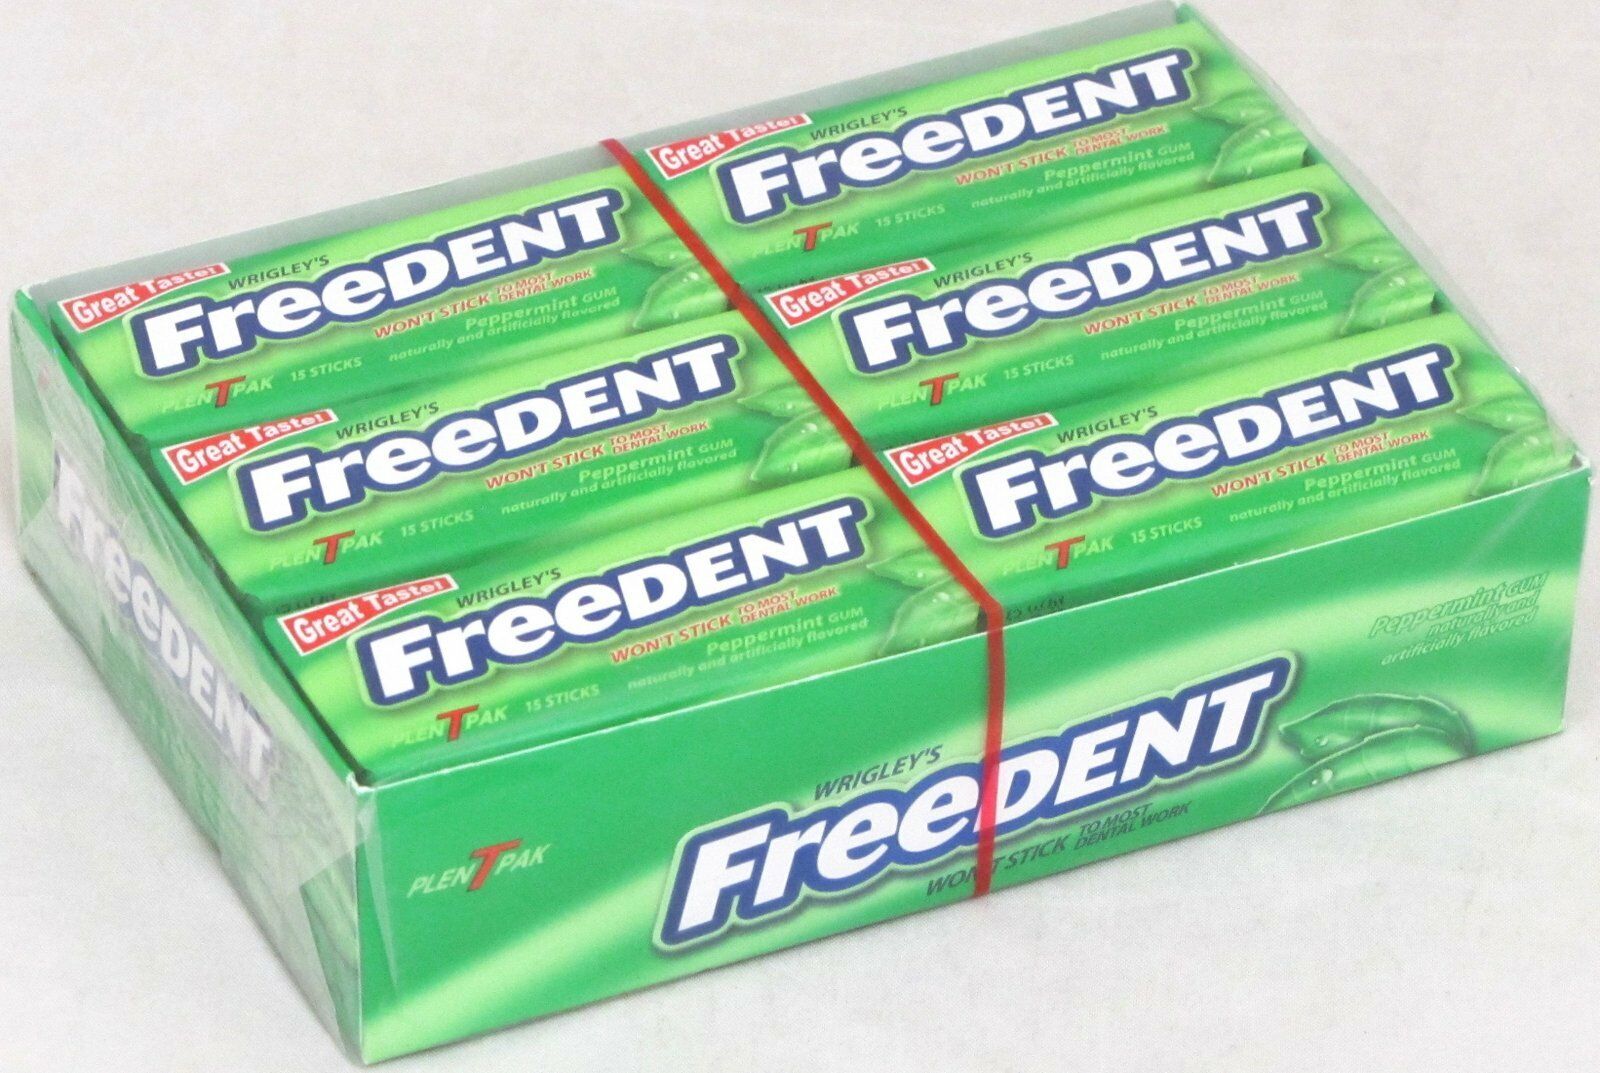 Wrigley's Freedent Peppermint Bubble Gum Candy 15 Stick Packs Case of 12 Packs